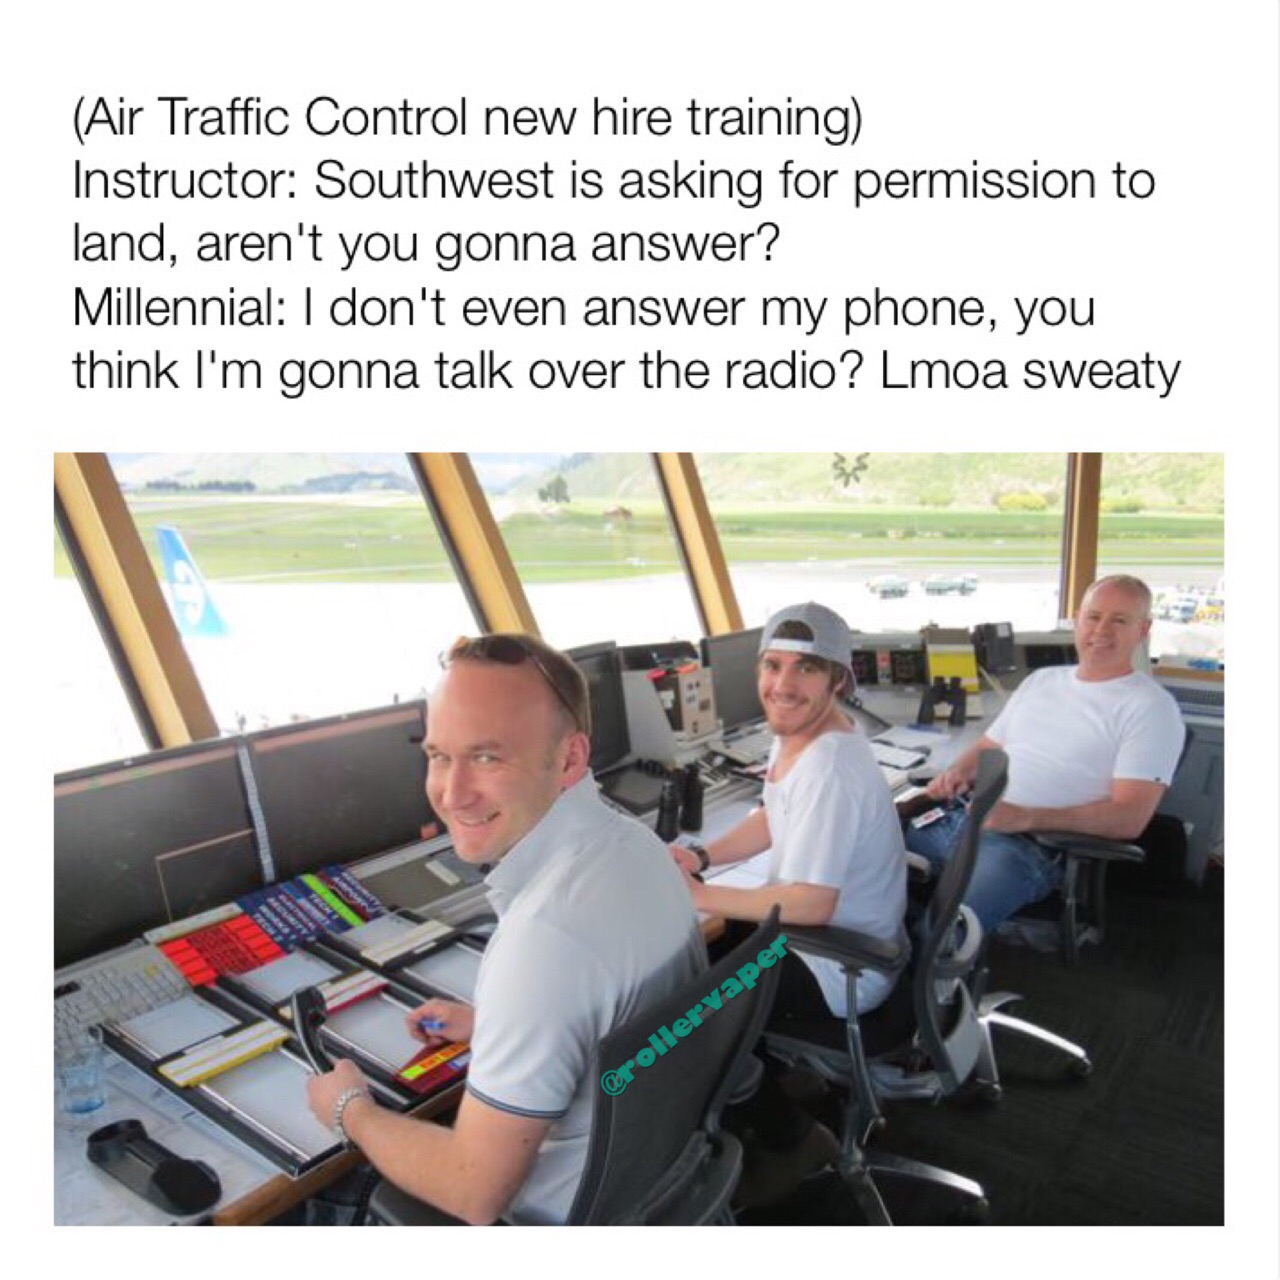 memes - communication - Air Traffic Control new hire training Instructor Southwest is asking for permission to land, aren't you gonna answer? Millennial I don't even answer my phone, you think I'm gonna talk over the radio? Lmoa sweaty